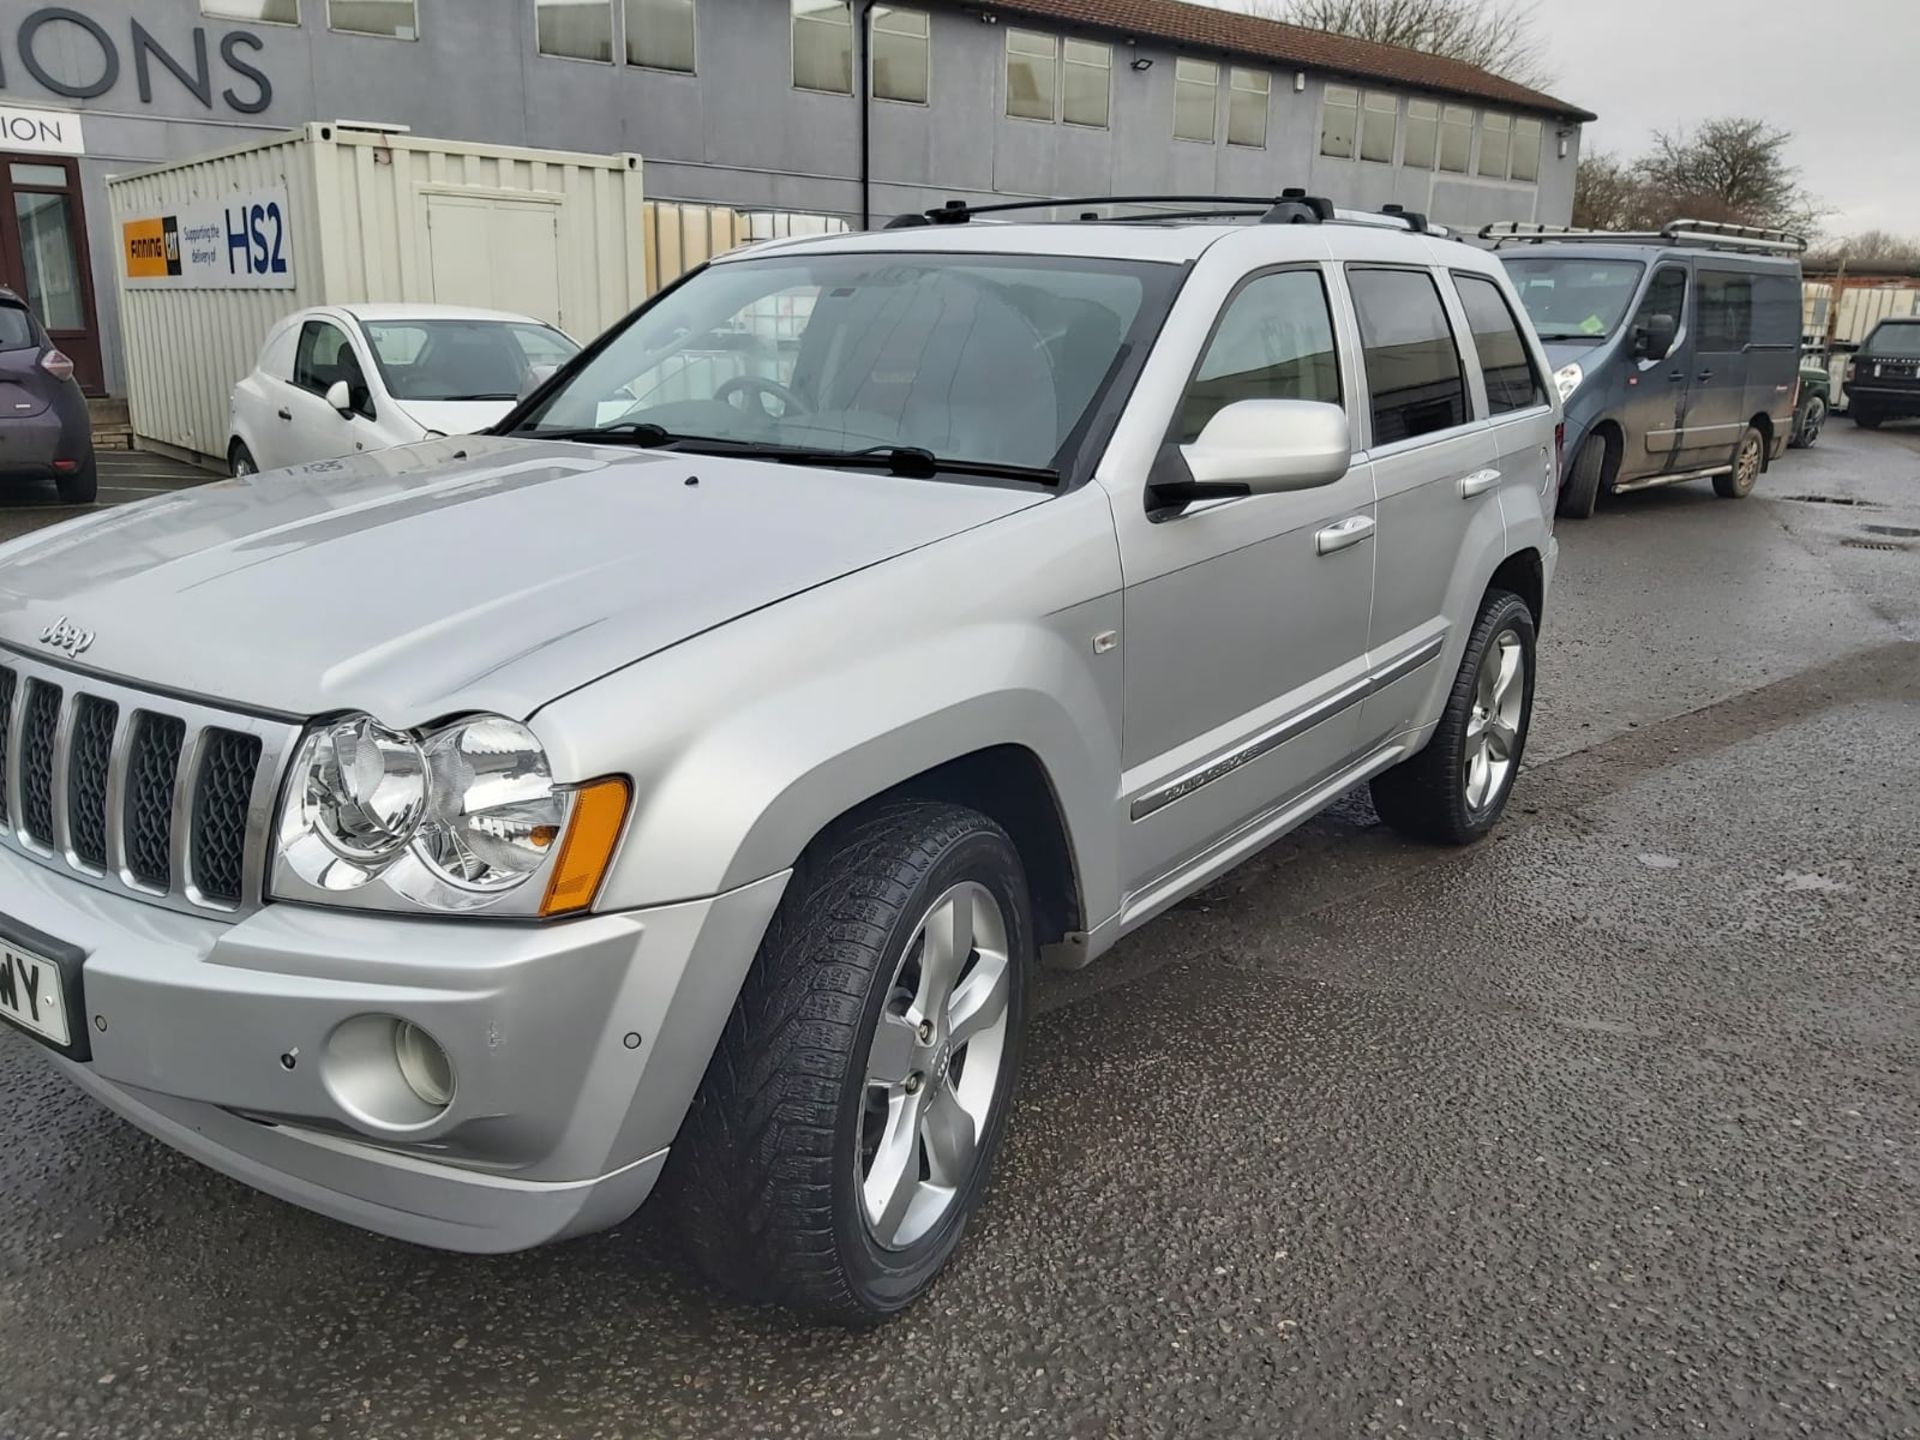 NO RESERVE 2007 JEEP G-CHEROKEE OVERLAND CRD A SILVER SUV ESTATE *NO VAT* - Image 4 of 17